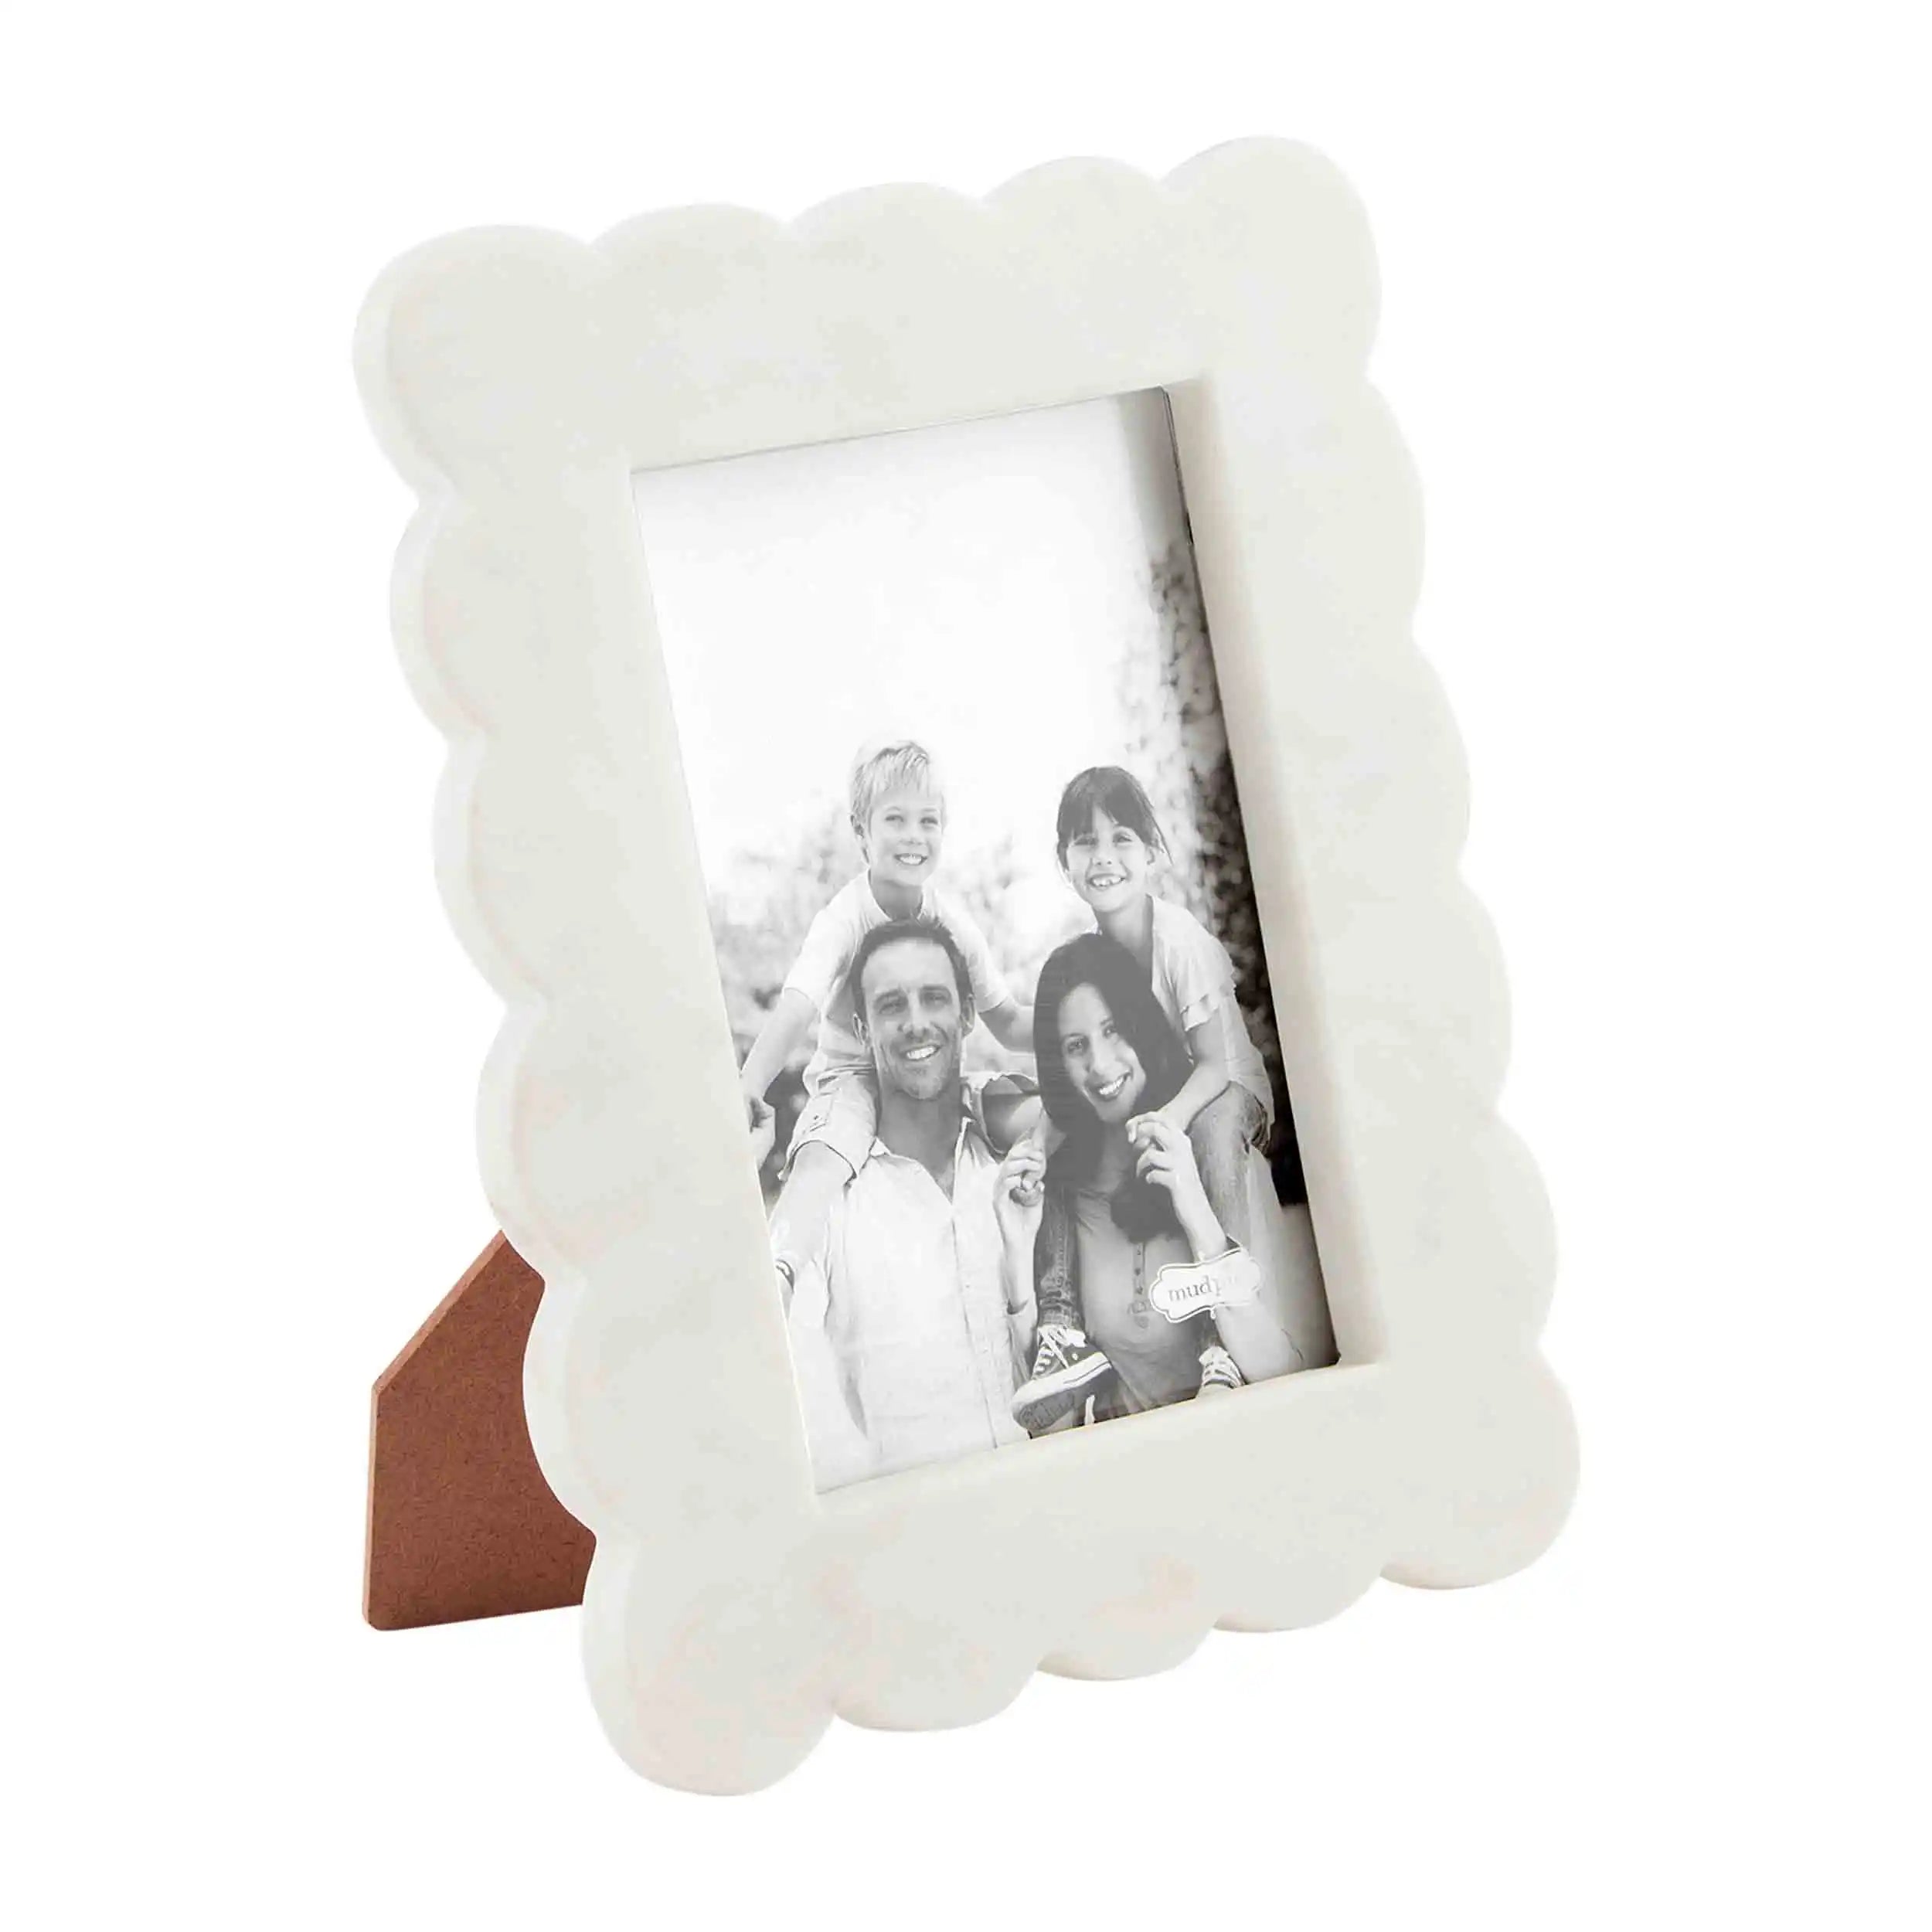 Scalloped Marble Picture Frame - 5x7